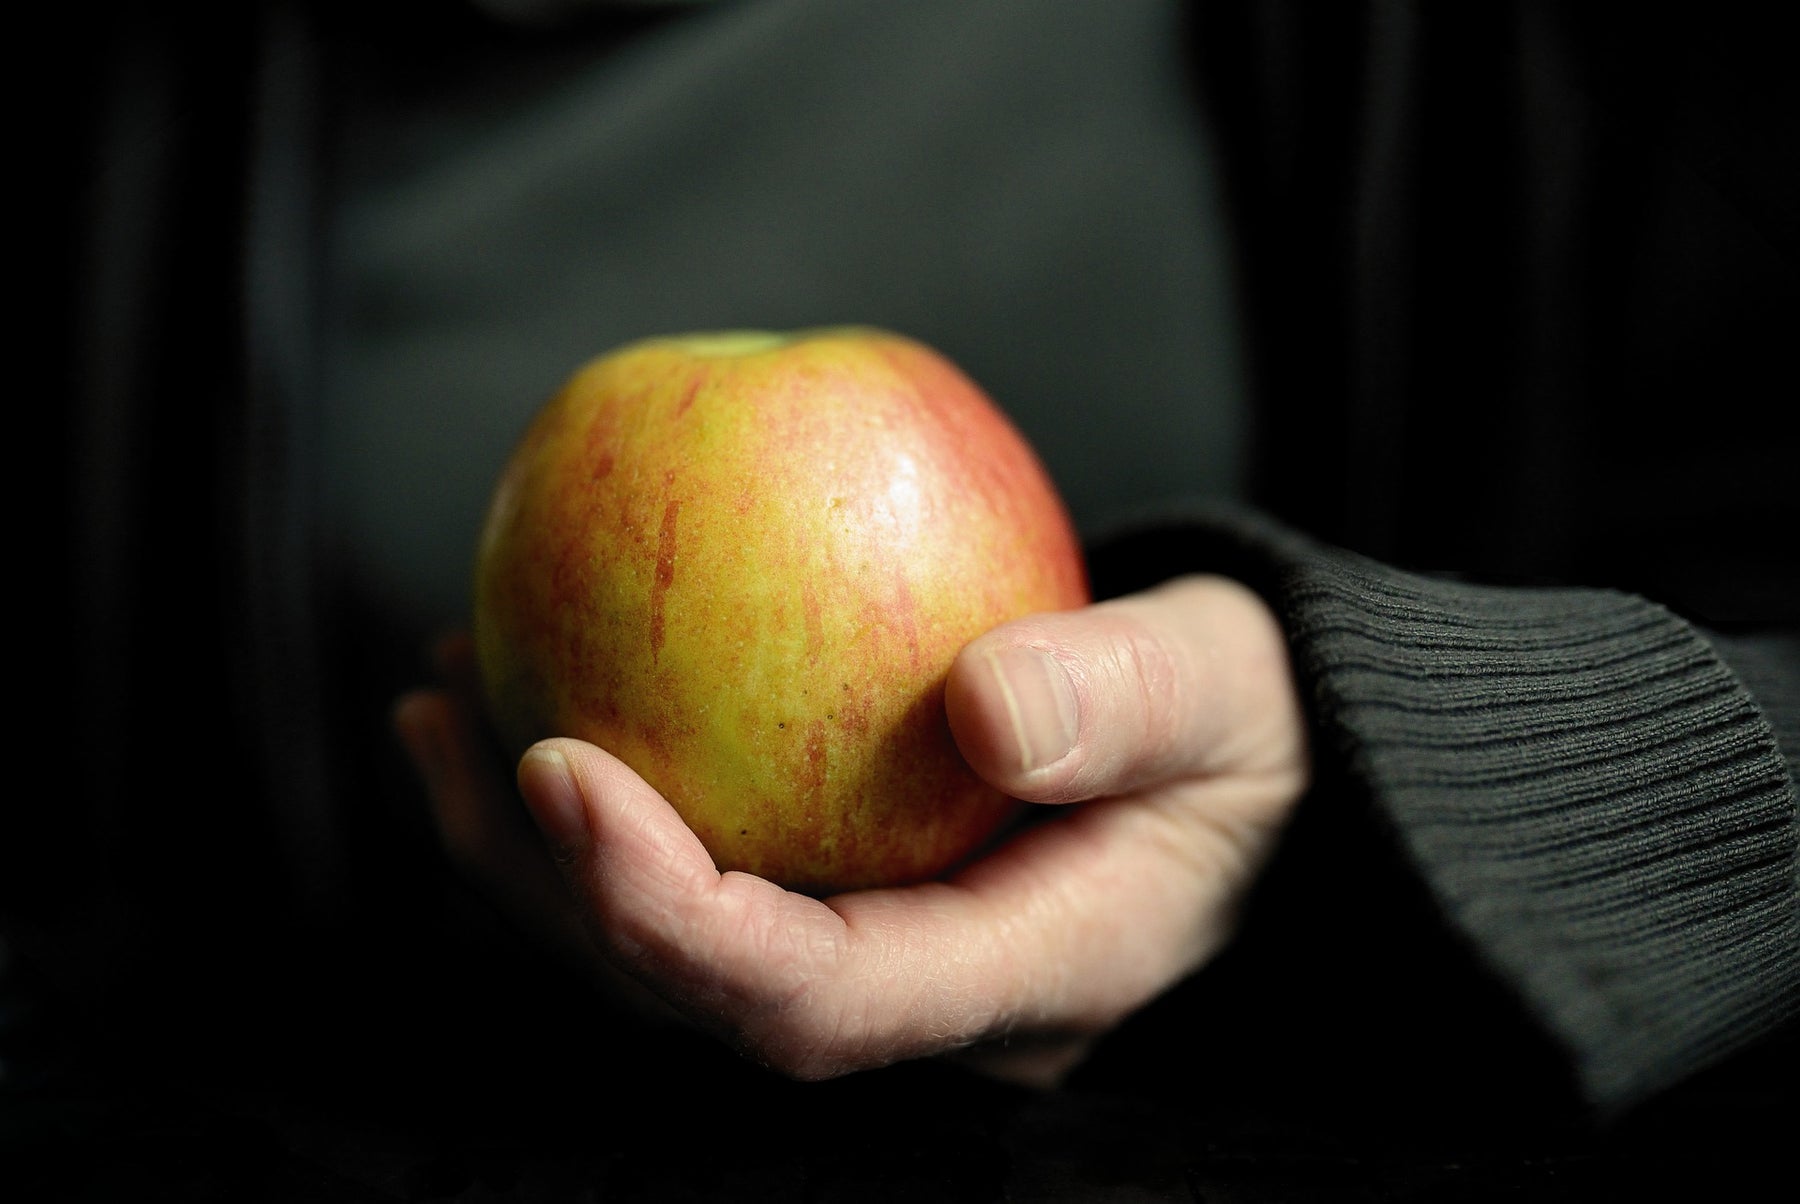 Person wearing black holding an apple in their hand